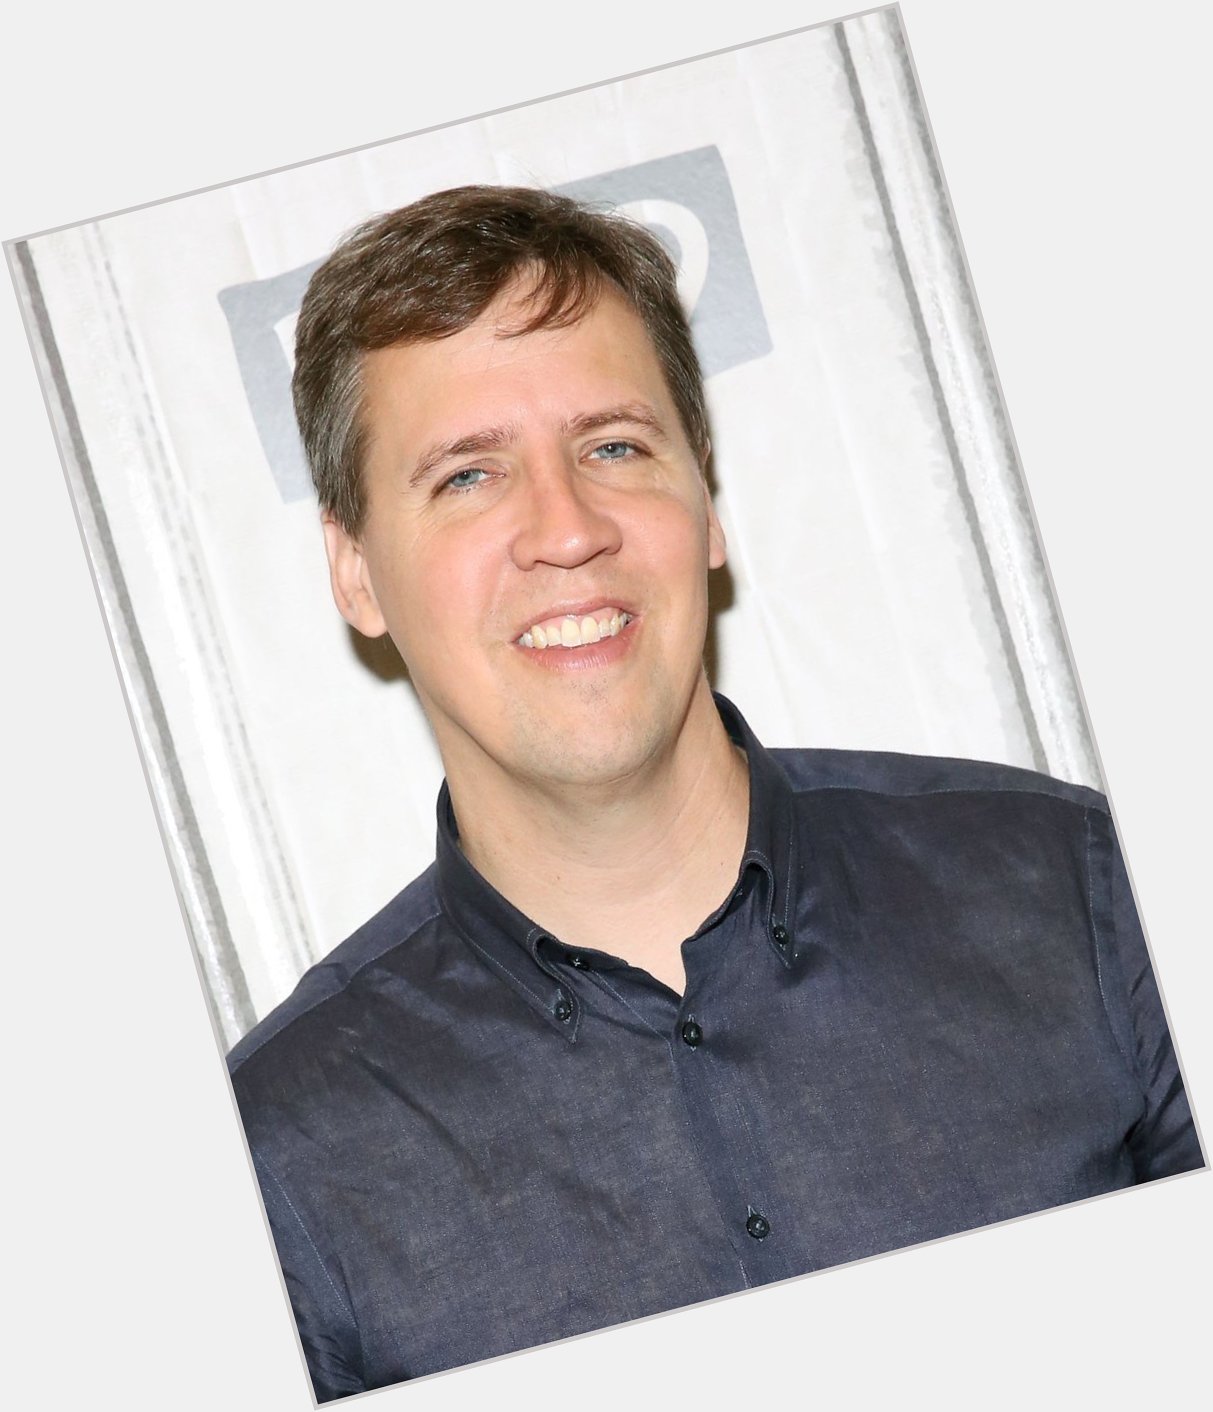 Happy birthday Jeff Kinney (Author of the Diary of a Wimpy Kid book series) 